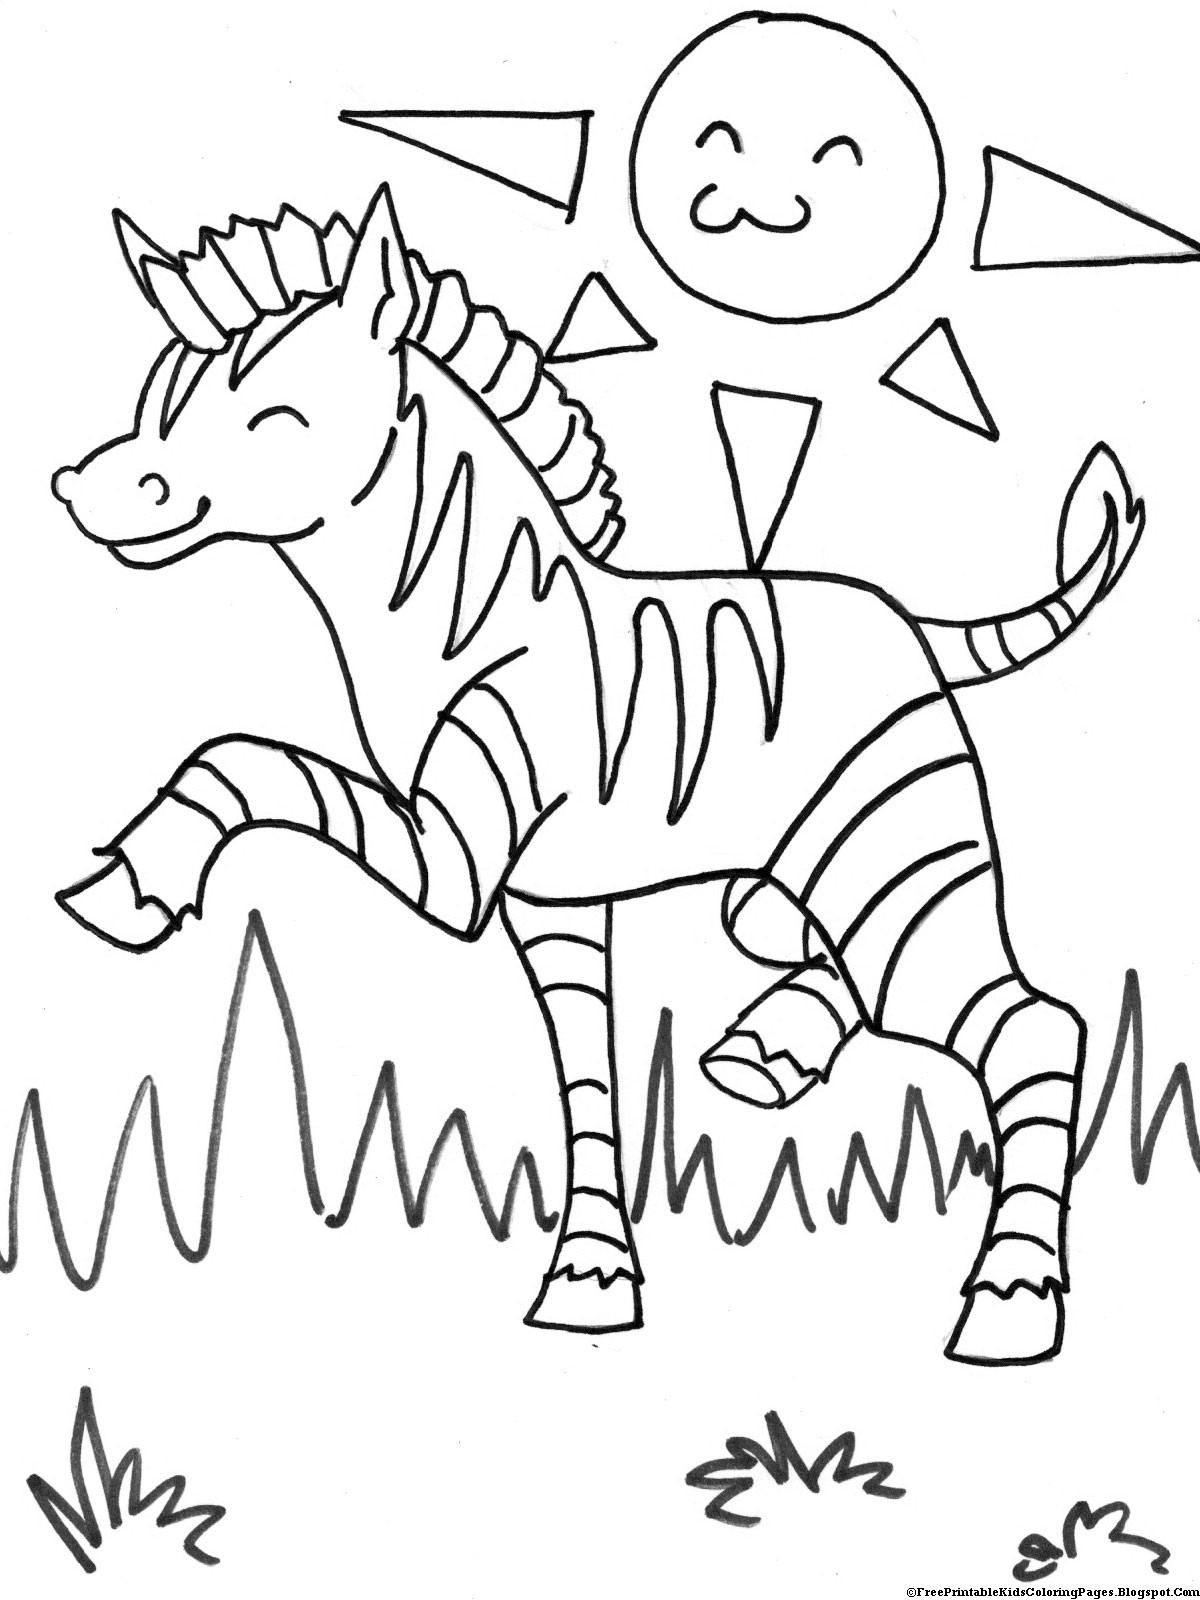 Coloring Pages For Kids To Print
 Zebra Coloring Pages Free Printable Kids Coloring Pages